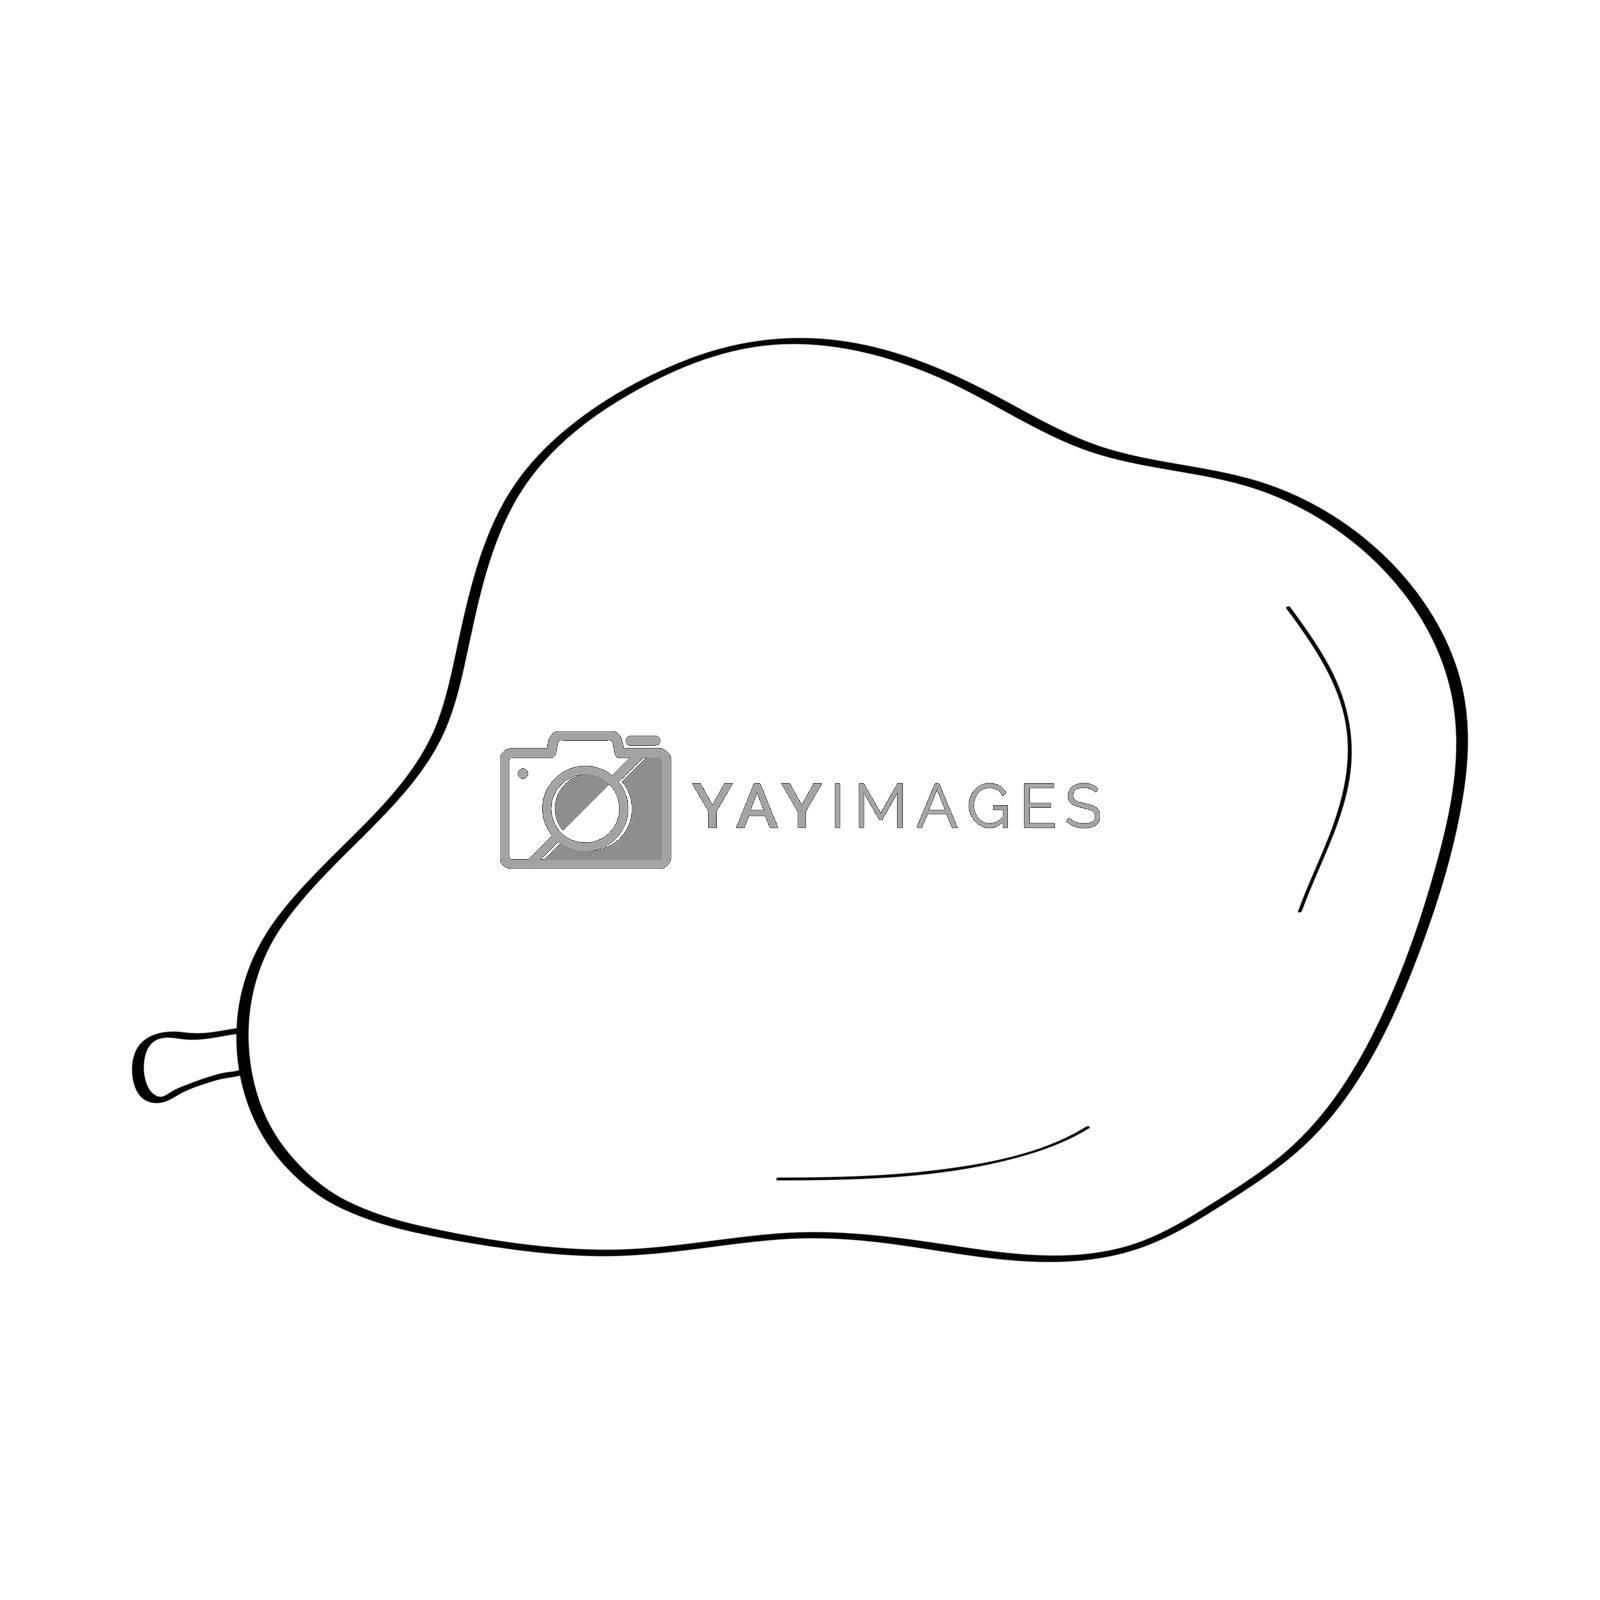 Royalty free image of Pear. Hand drawn doodle icon. Vector black and white illustratio by Olena92